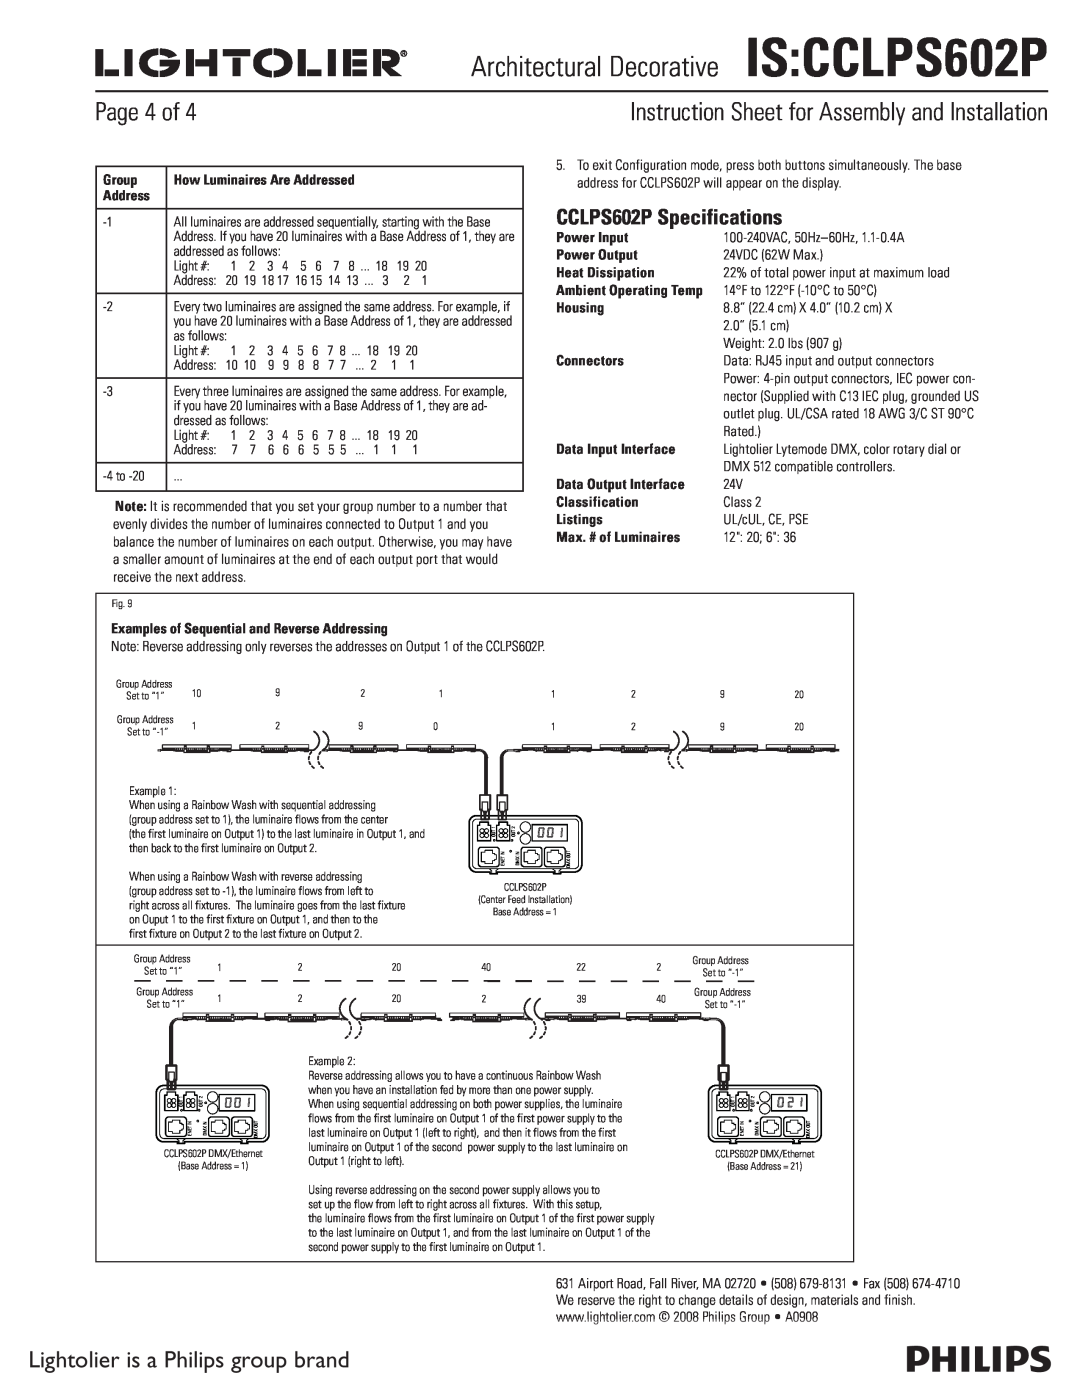 Lightolier IS:CCLPS602P instruction sheet Page 4 of, CCLPS602P Specifications, Architectural DecorativeIS CCLPS602P 